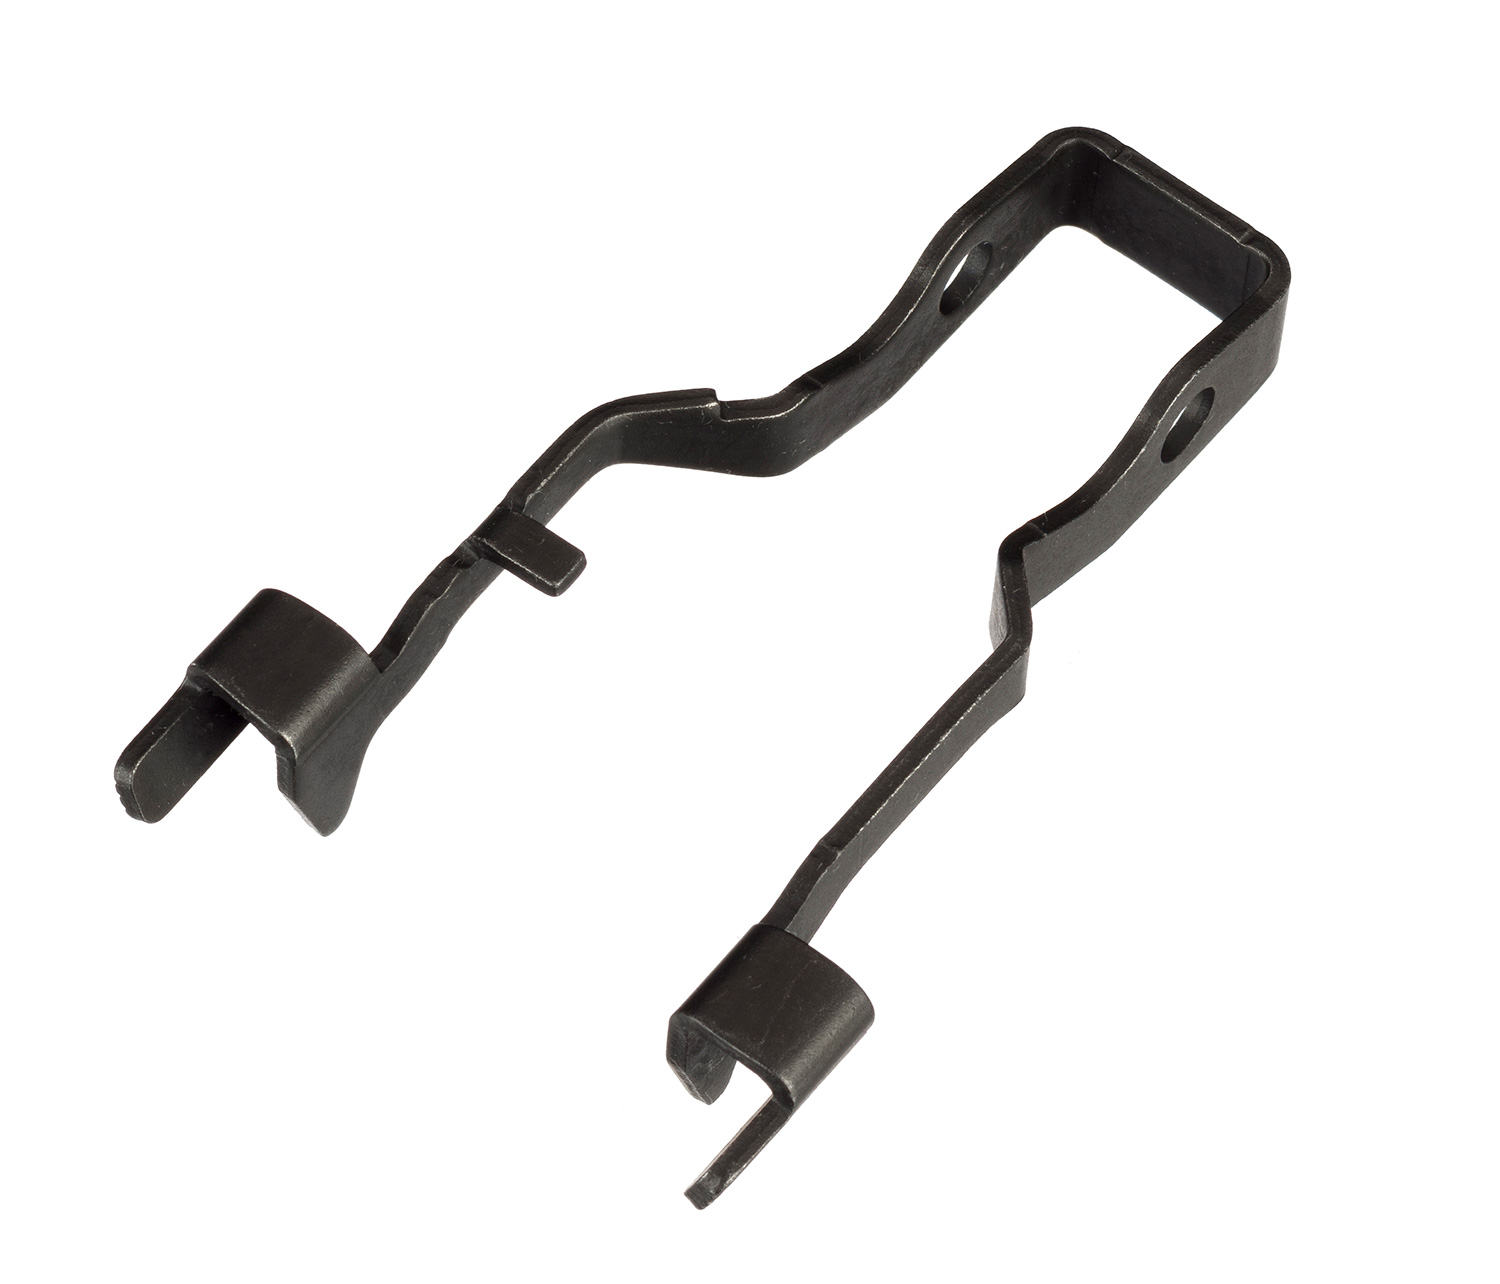 Defense-and-firearms - Slide Stop Lever Assembly